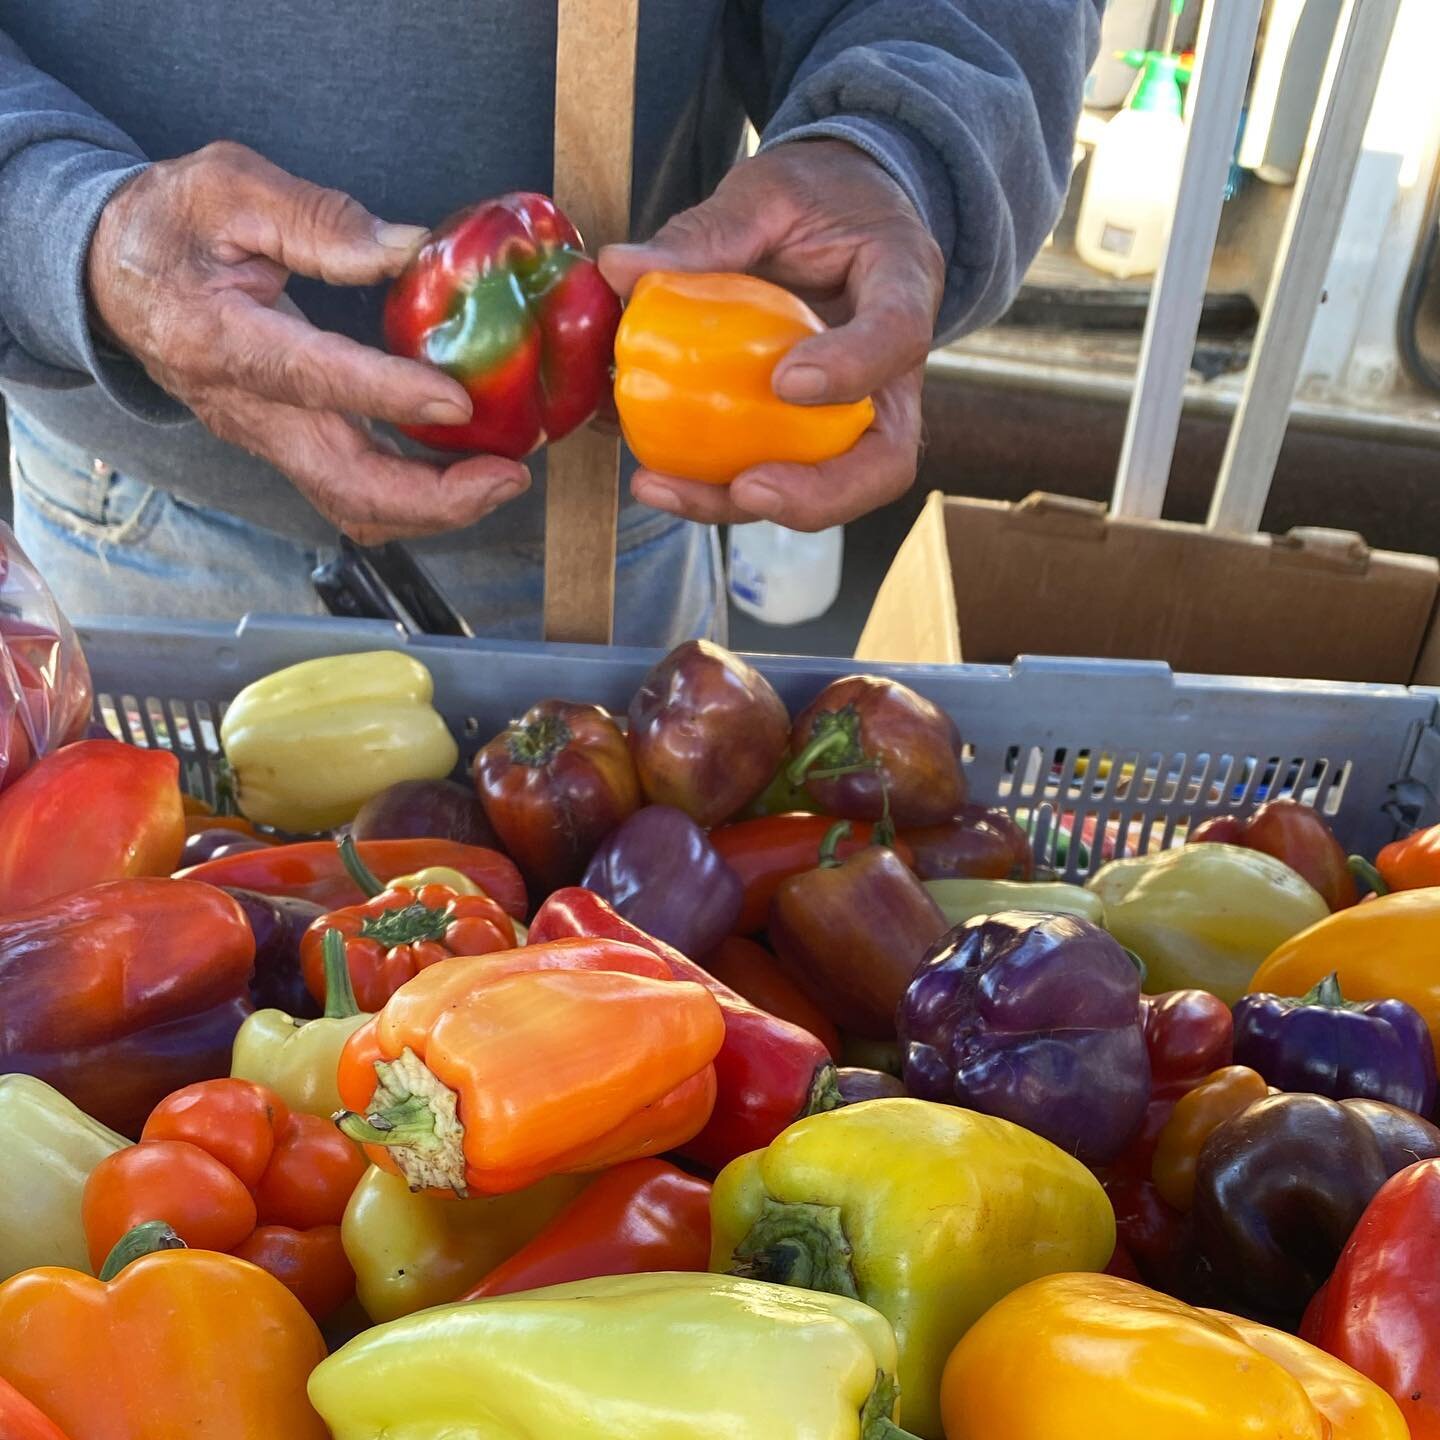 Take advantage of the last of the late summer produce before leafy greens and root vegetables are here to stay. 

#haveaplant #farmersmarket #eatlocalgrown #sweetpeppers